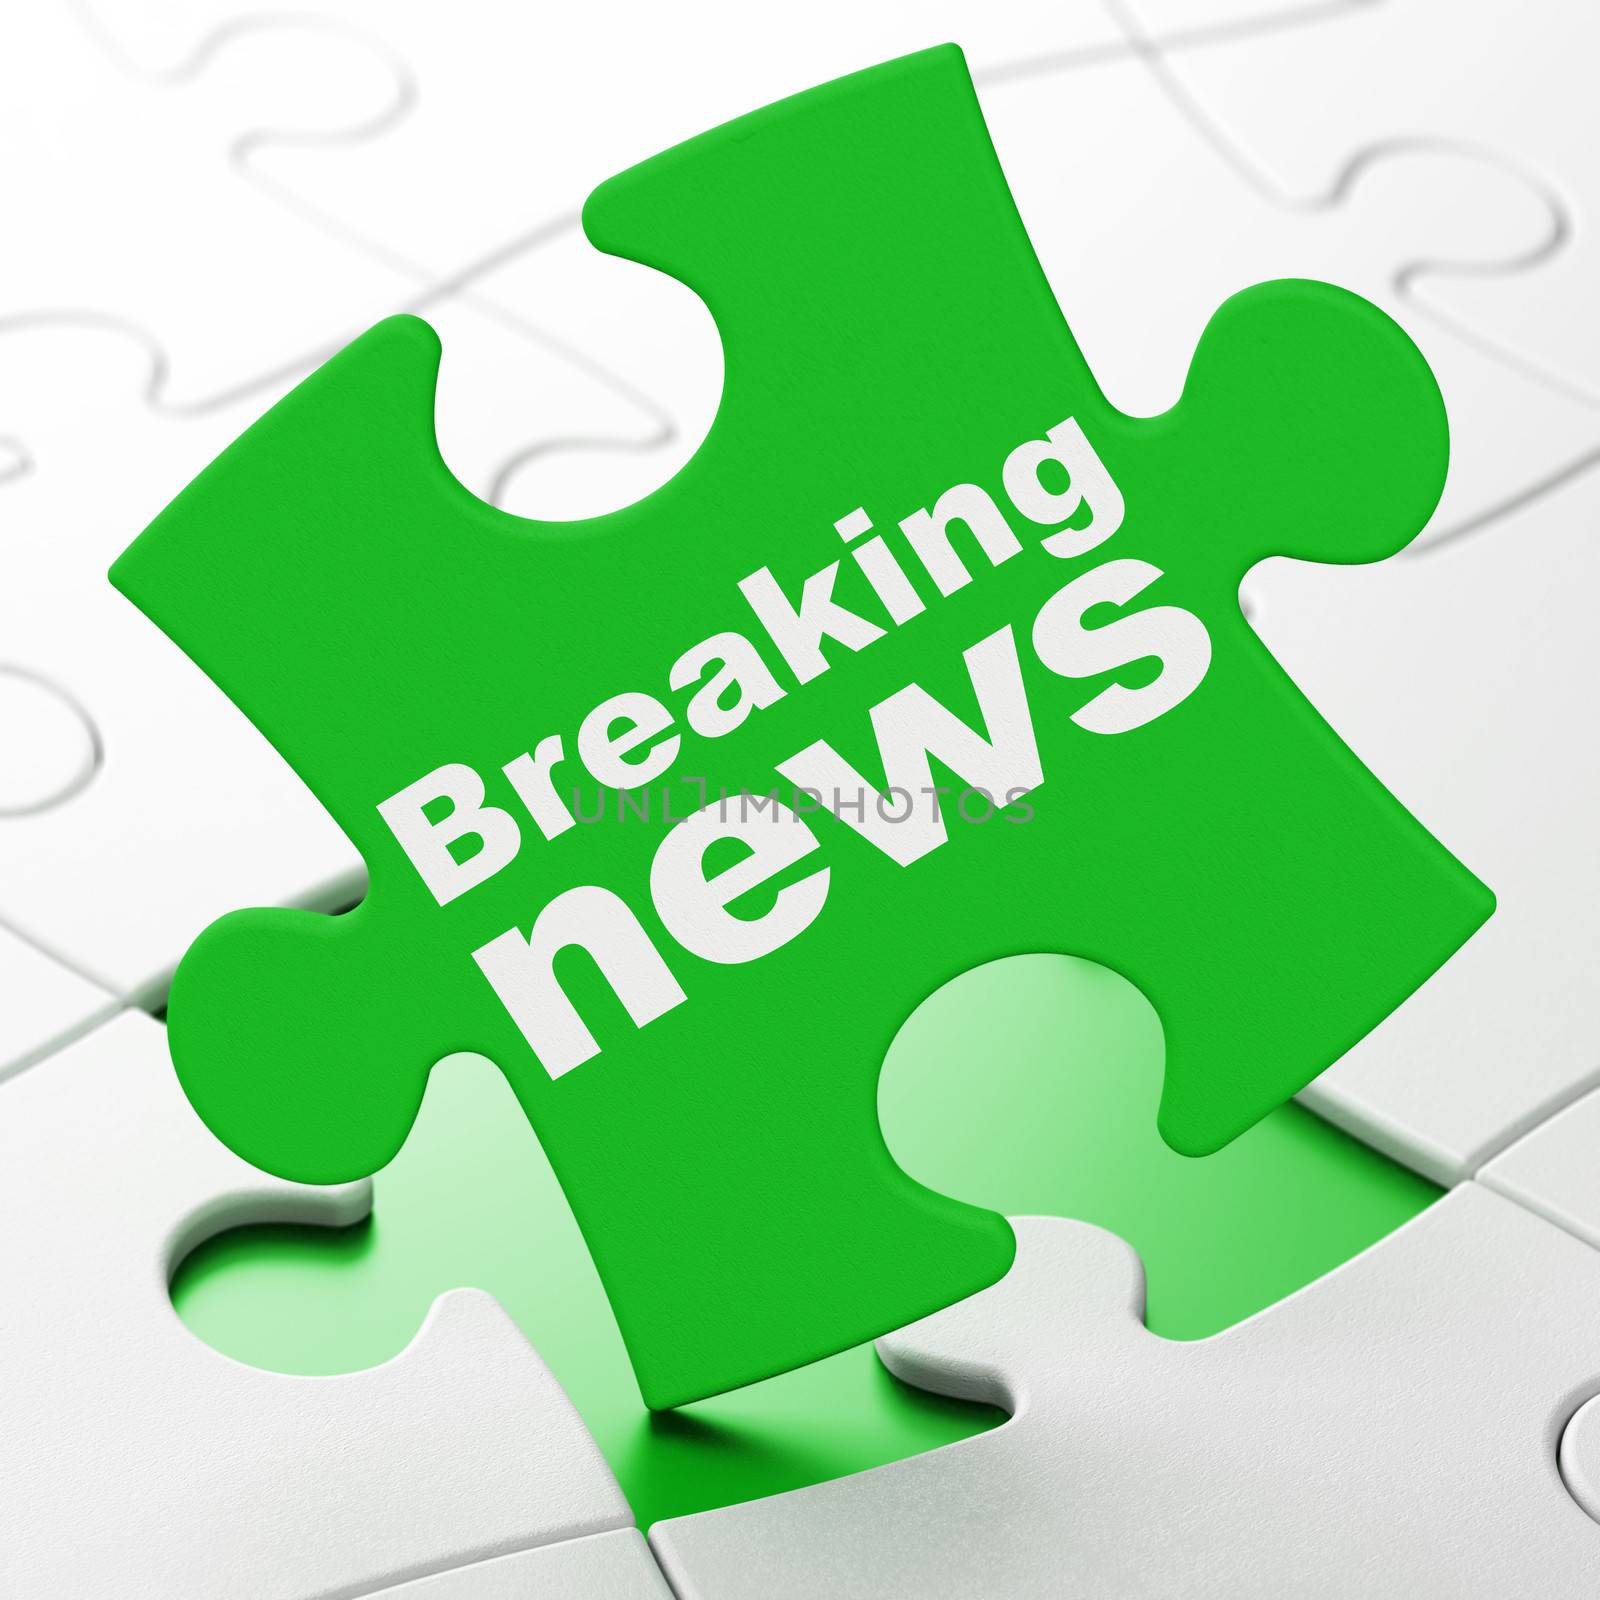 News concept: Breaking News on Green puzzle pieces background, 3d render